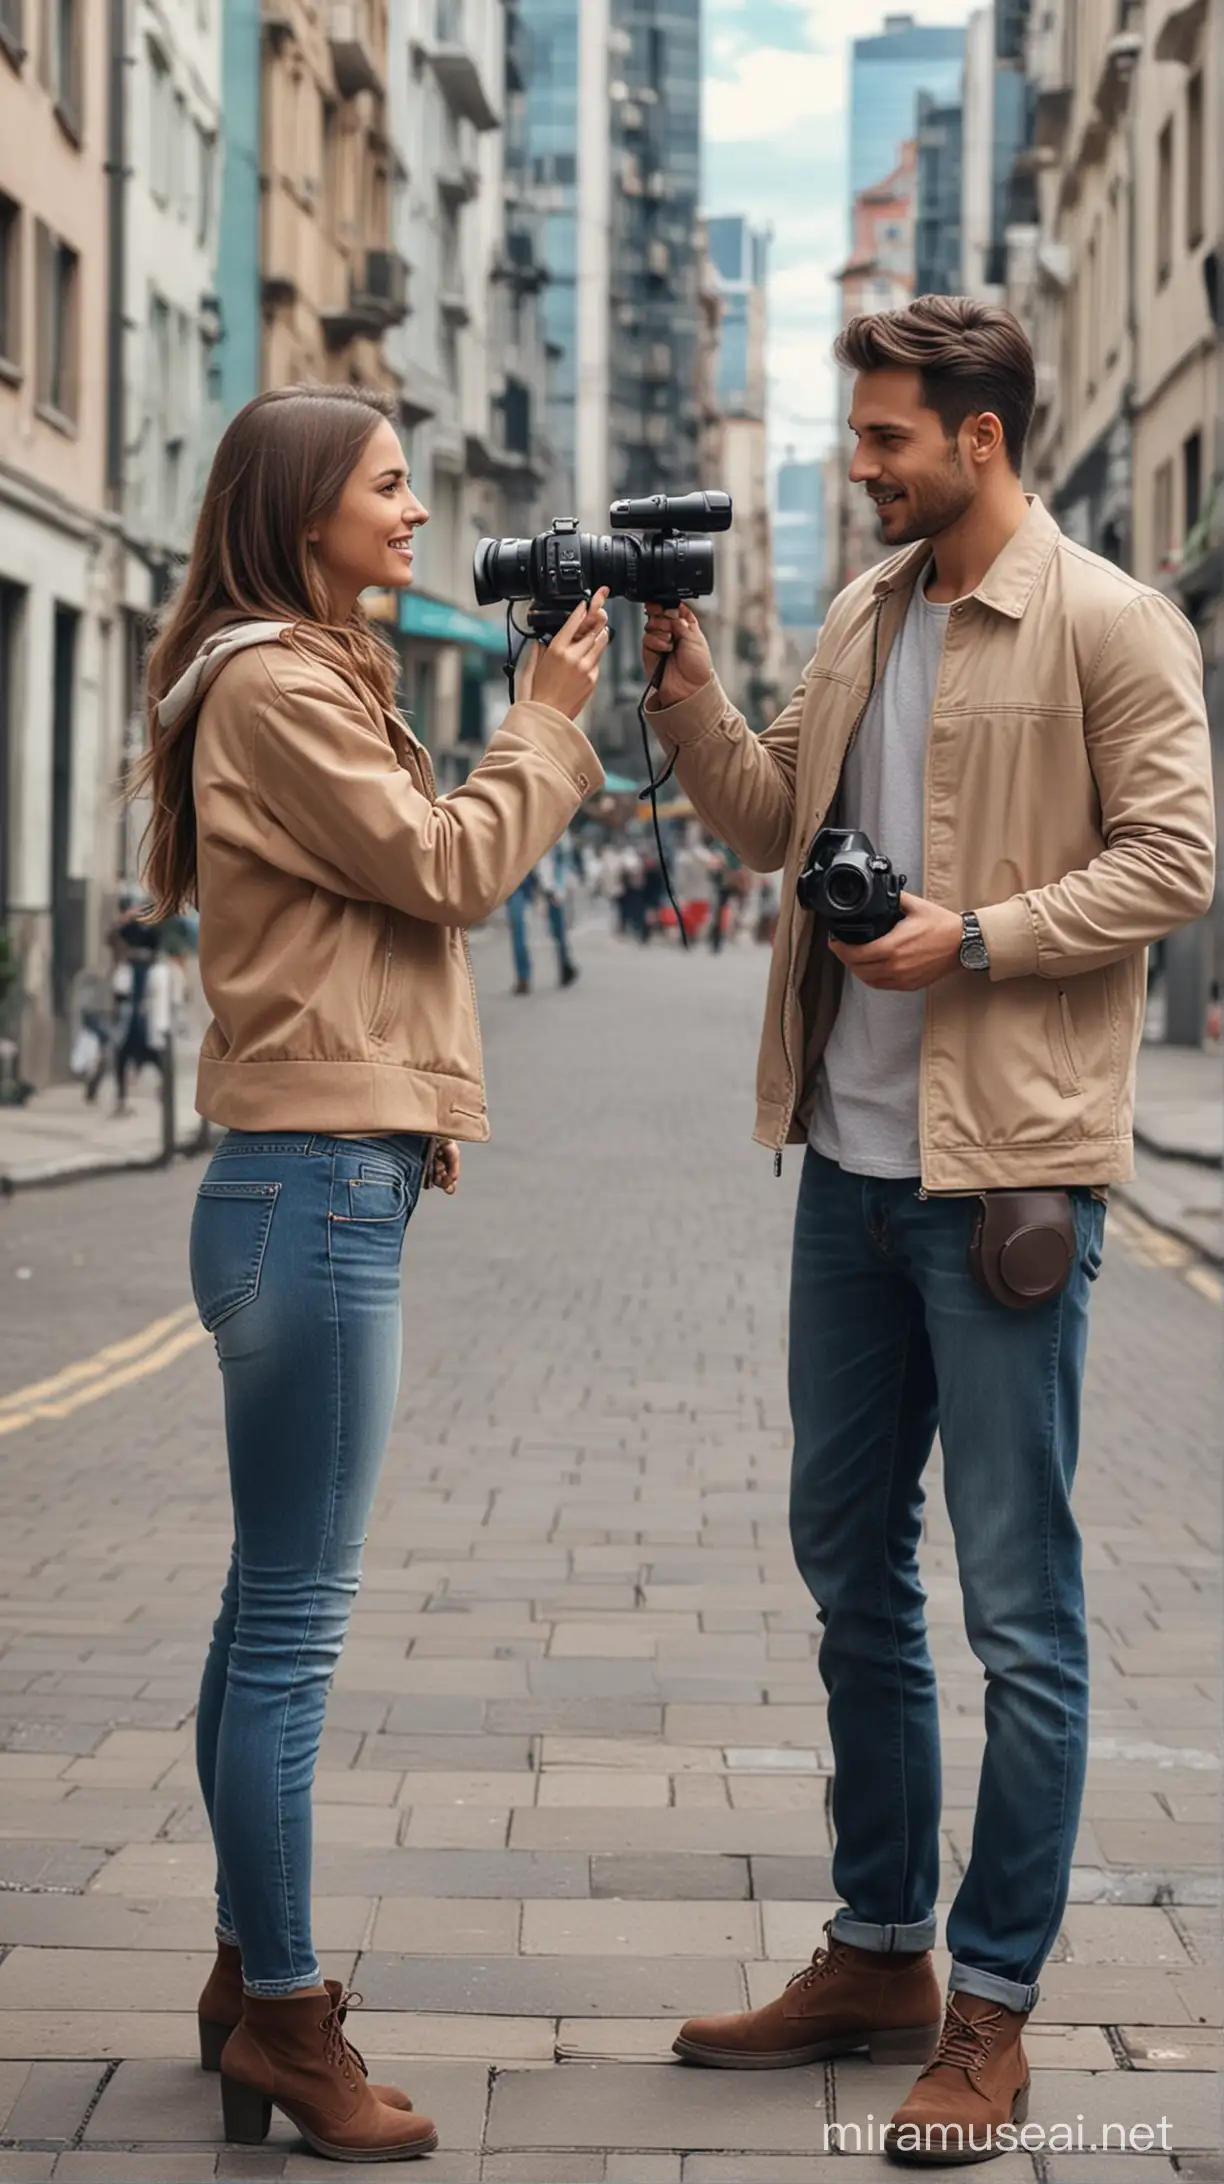 Man Filming Girl with Video Camera in Urban Setting